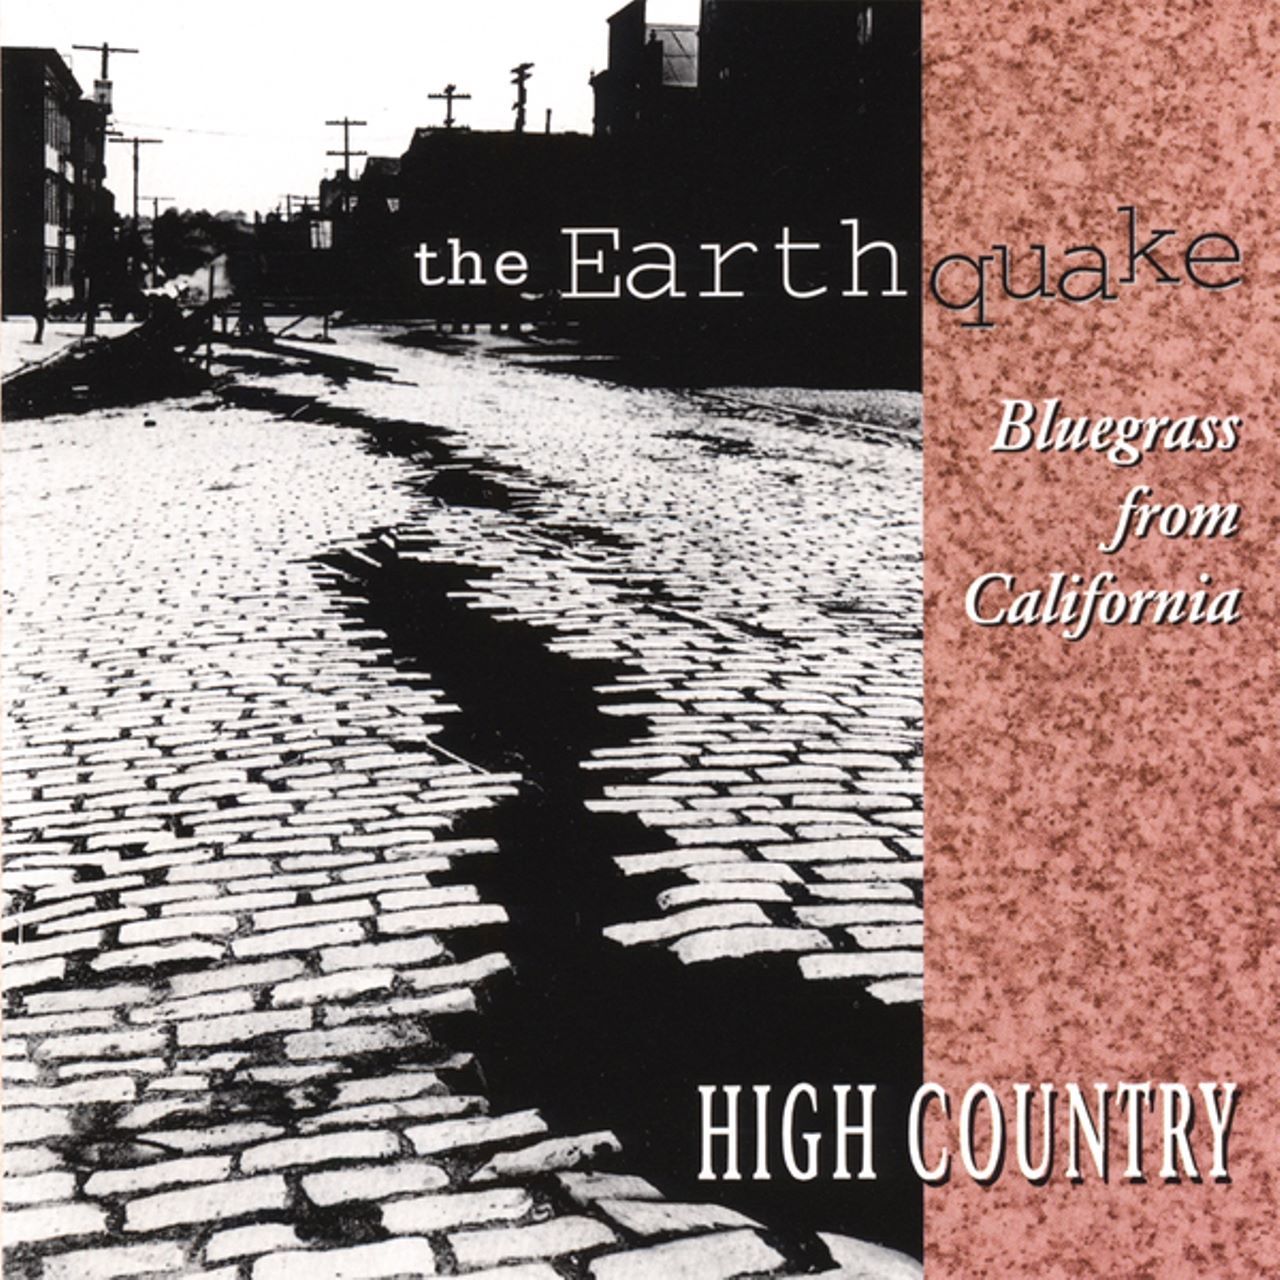 High Country - The Earthquake cover album